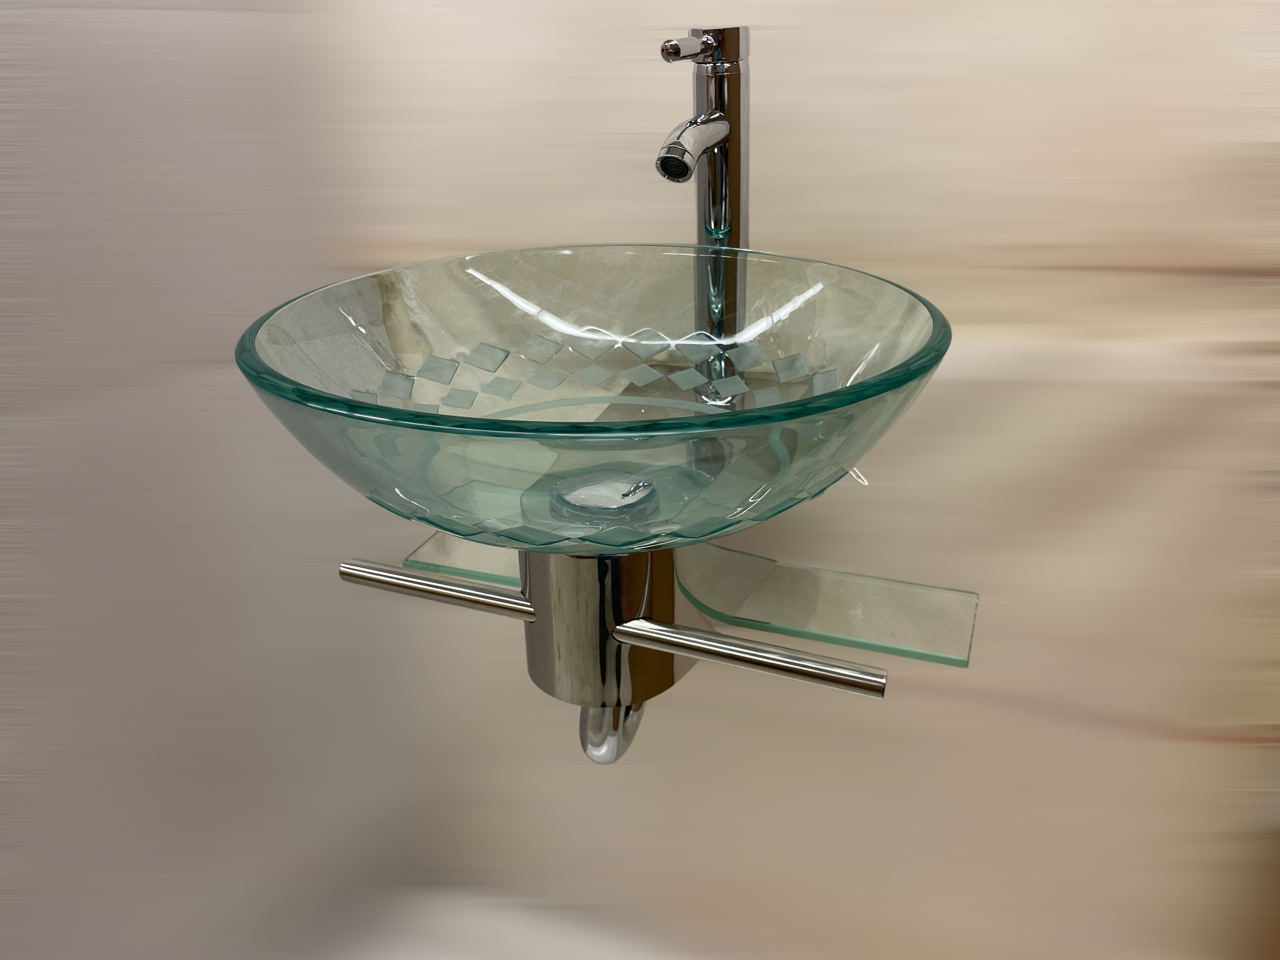 Lorixon LV-002SQ Small Modern Bathroom Vanity Clear Tempered Glass Bowl  Handmade Sink Unique Pattern Wall Mount Floating Stainless Steel Pedestal  Combo Set - Lorixon Product